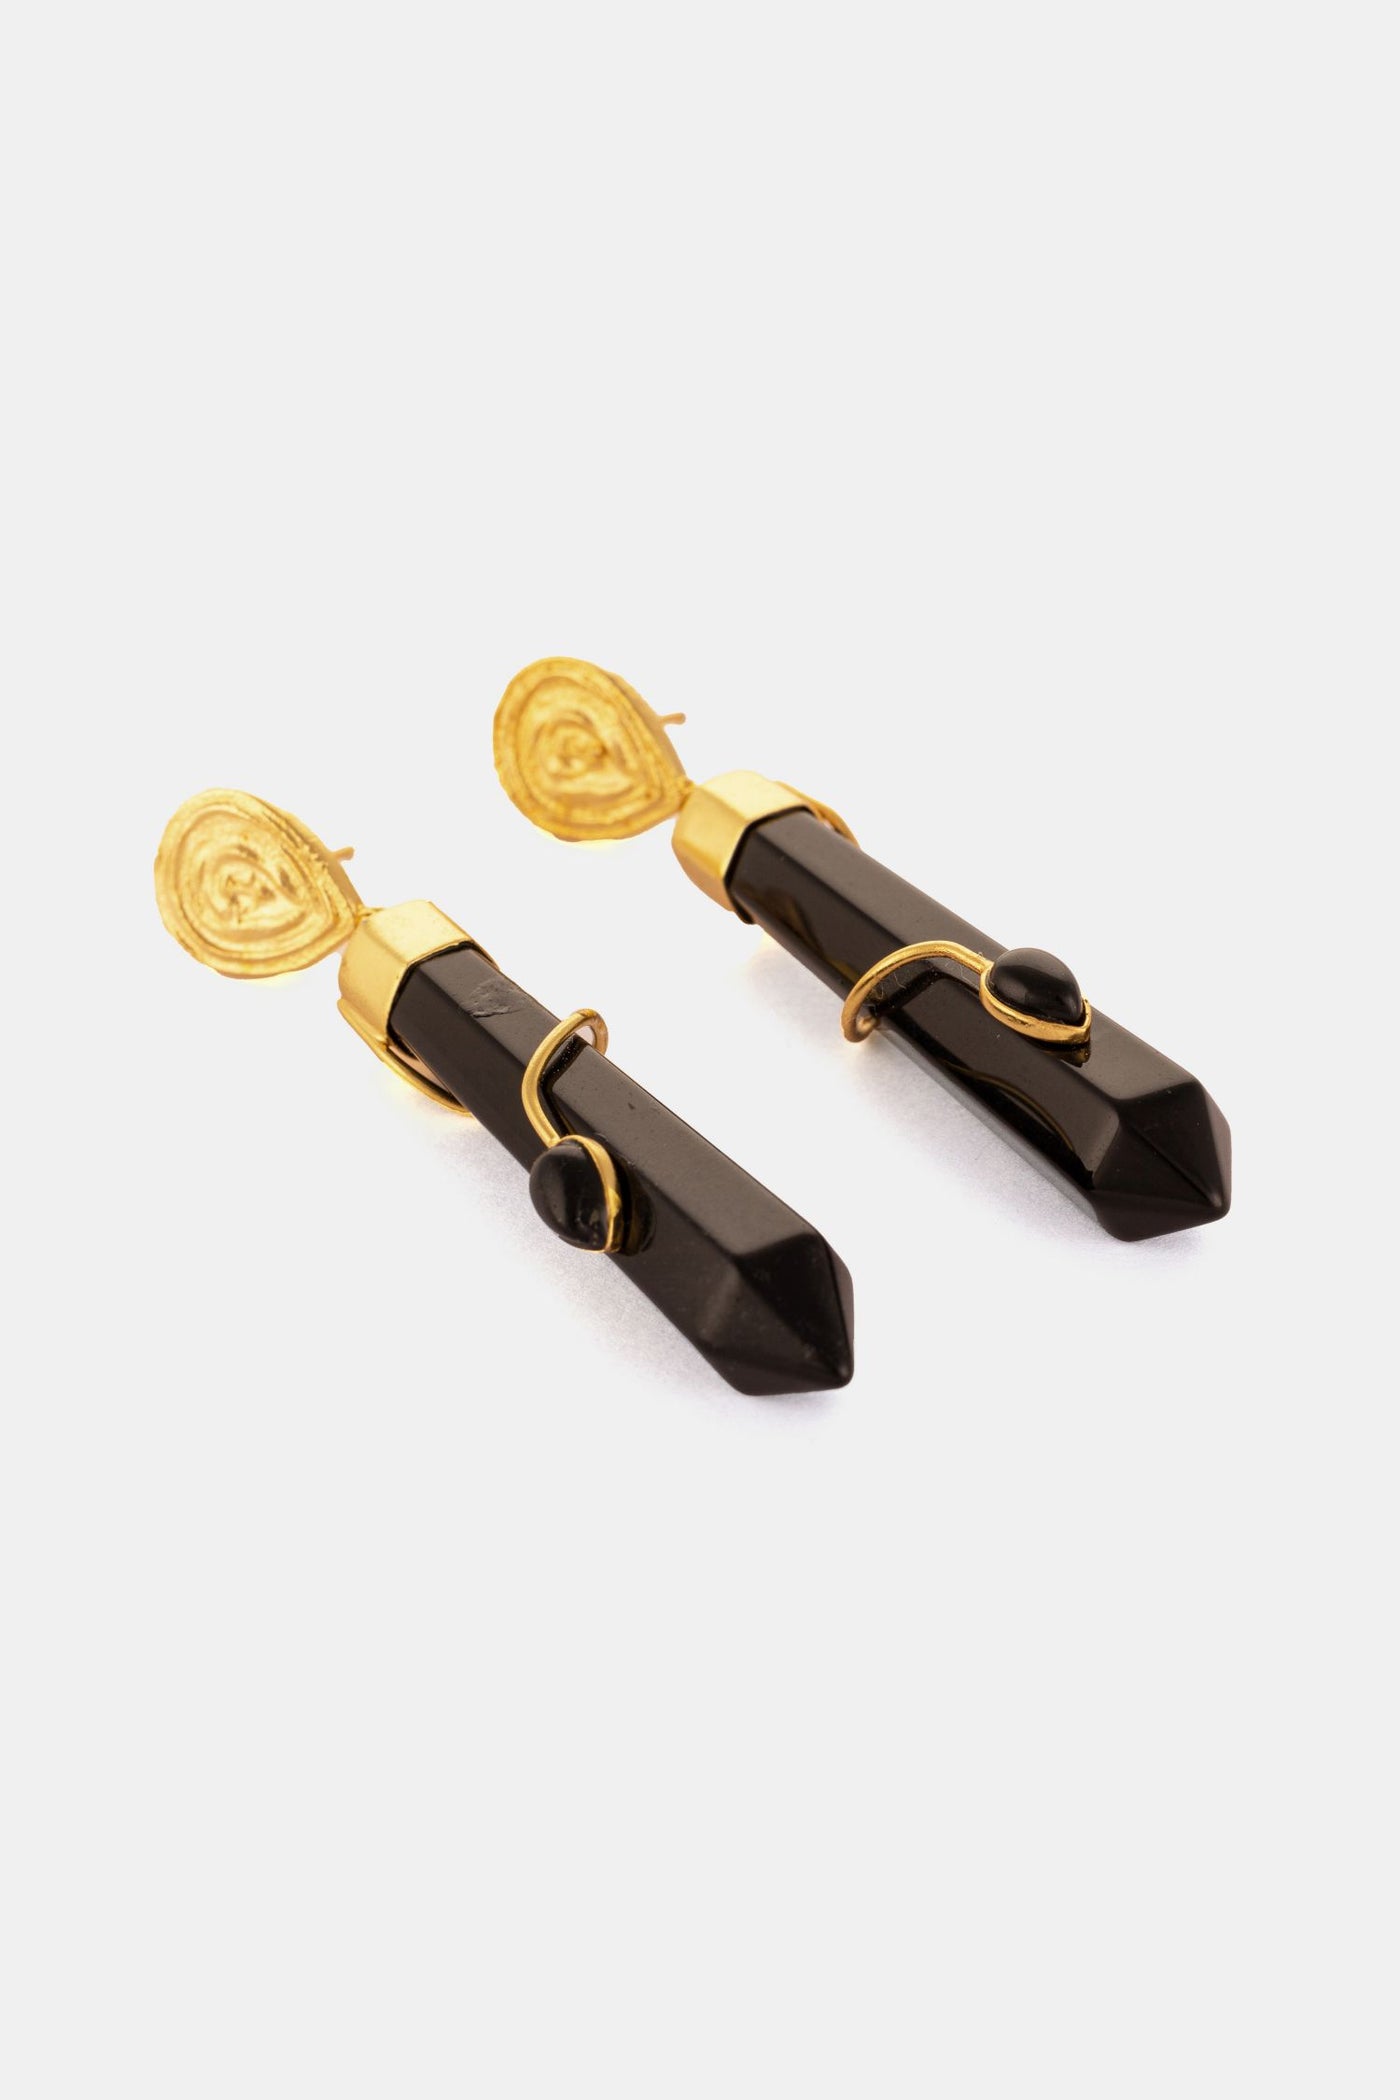 Pencil Shaped Black And Golden Earring